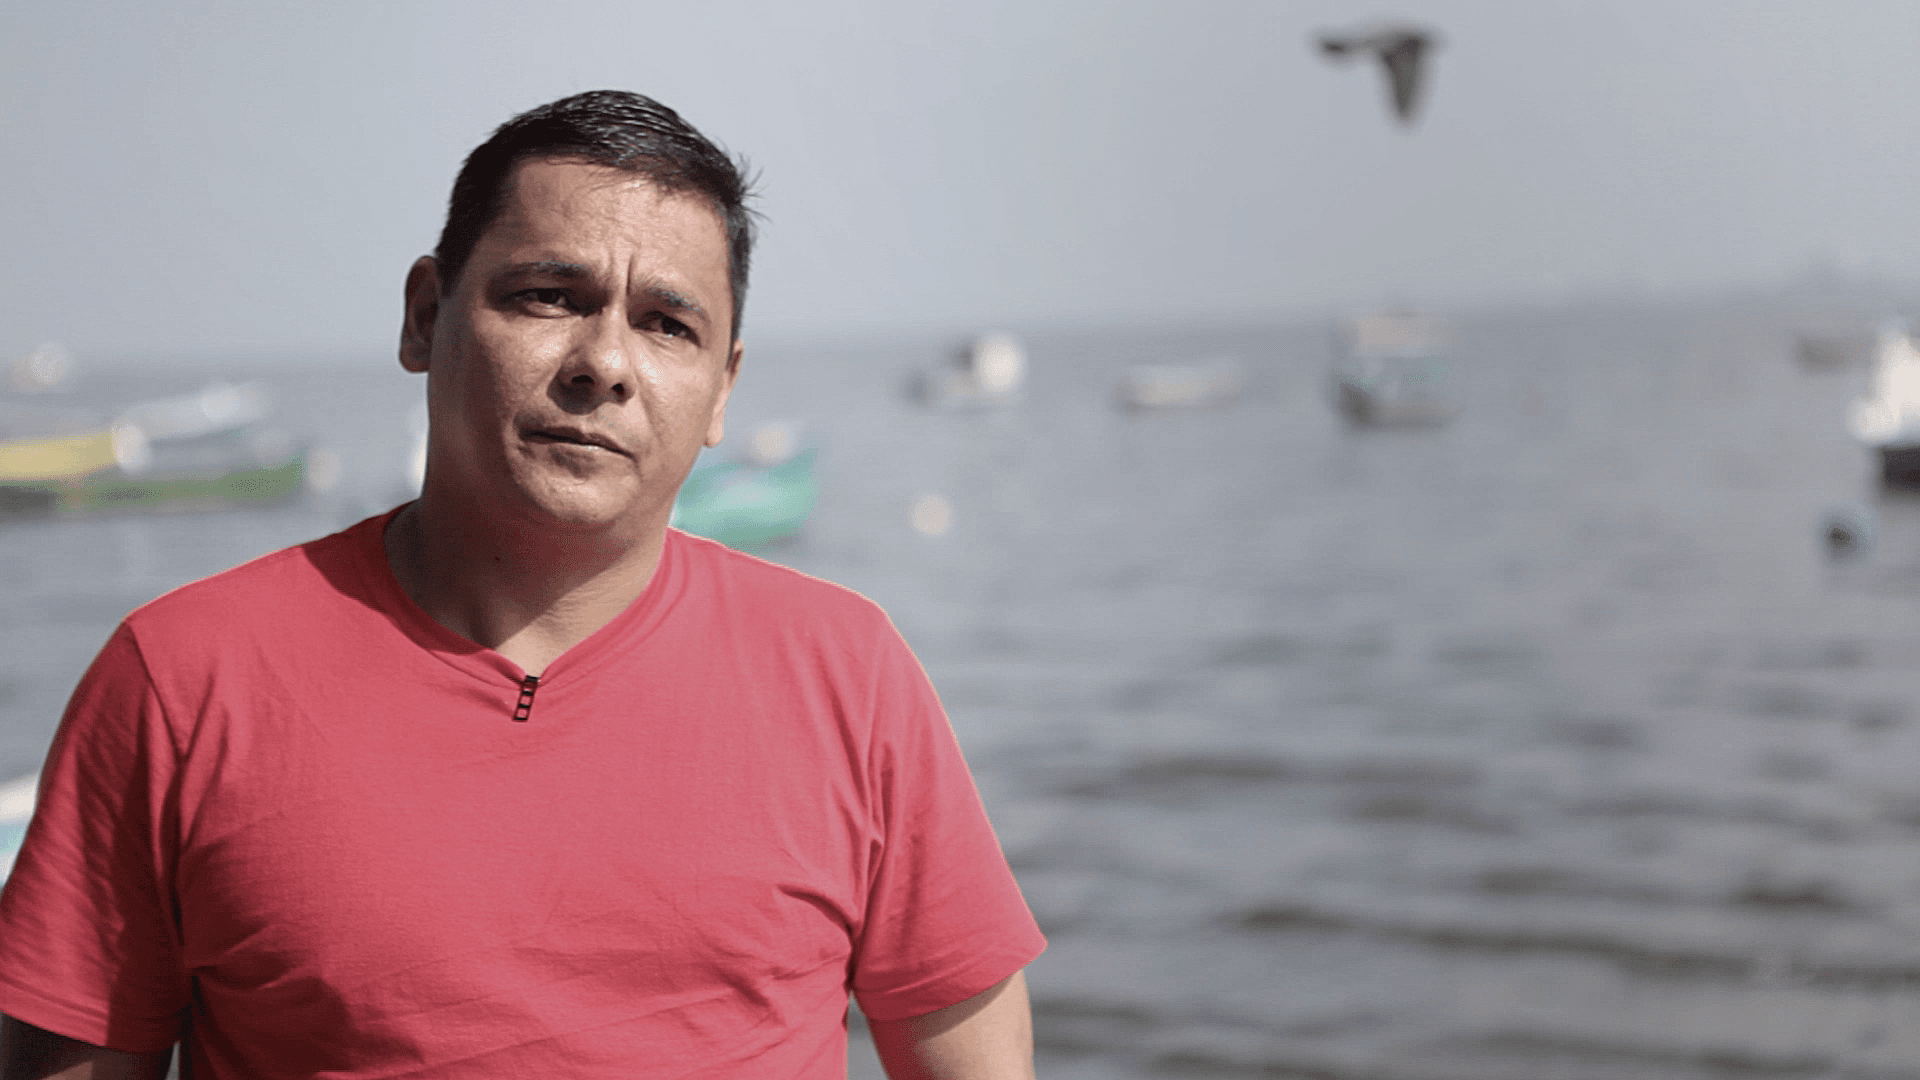 43-year-old fisherman-turned-activist Sandy Anderson stands on the shore of Brazil's Guarabana Bay, just outside Rio de Janeiro. Anderson says he's nearly been killed twice fighting to save this bay from polluters, and now lives in hiding.